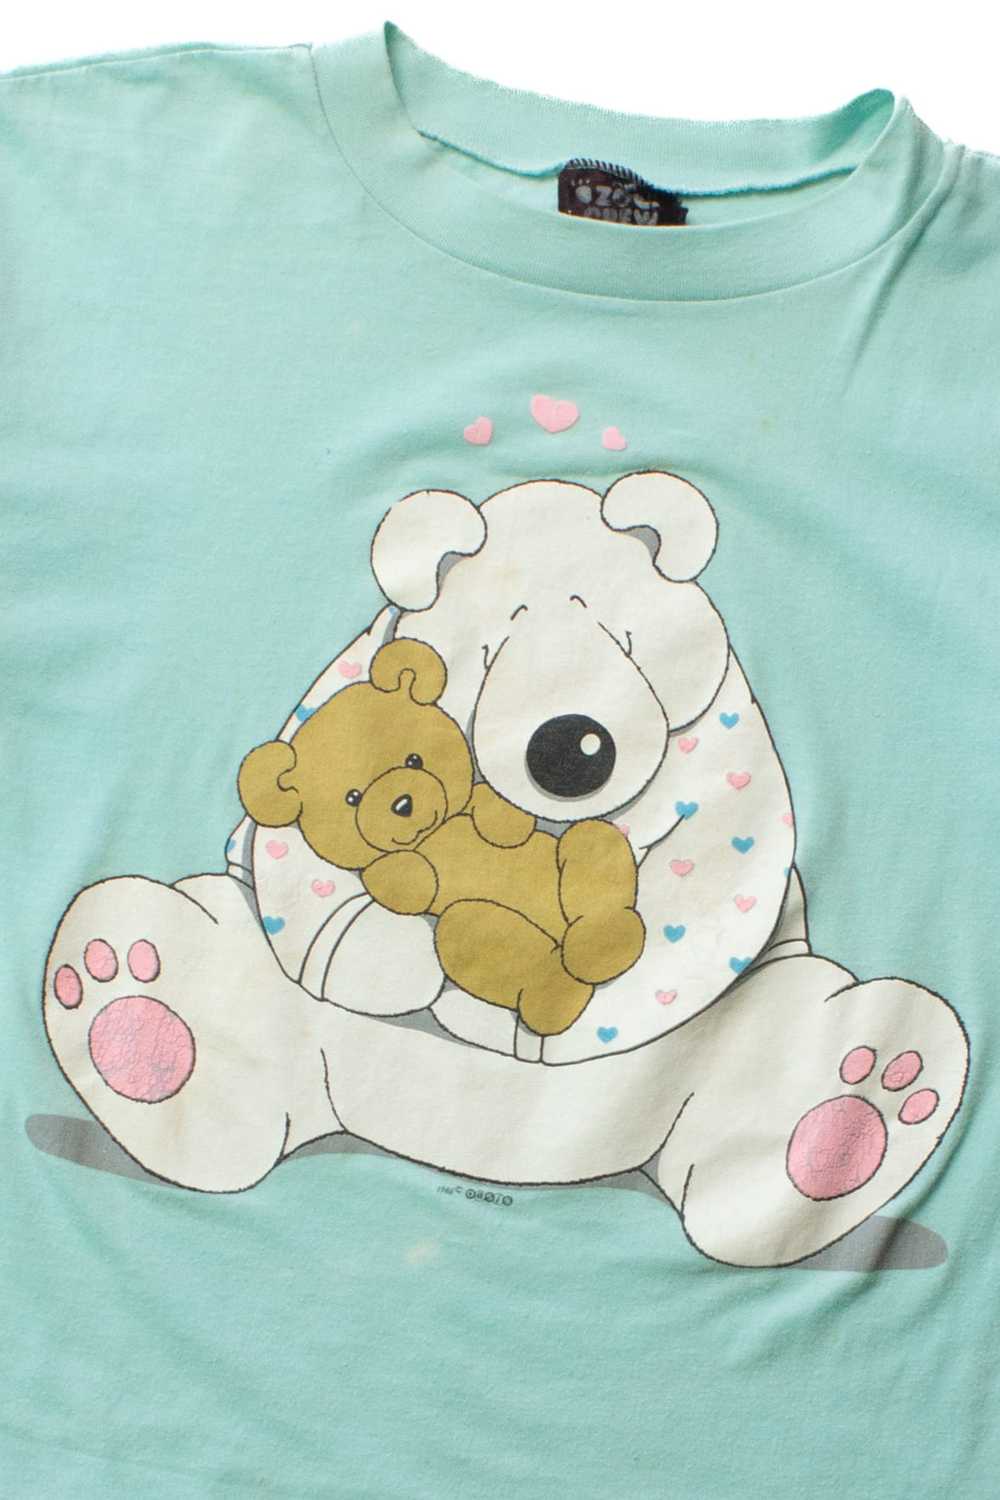 Vintage Cuddly Bears T-Shirt (1980s) - image 2